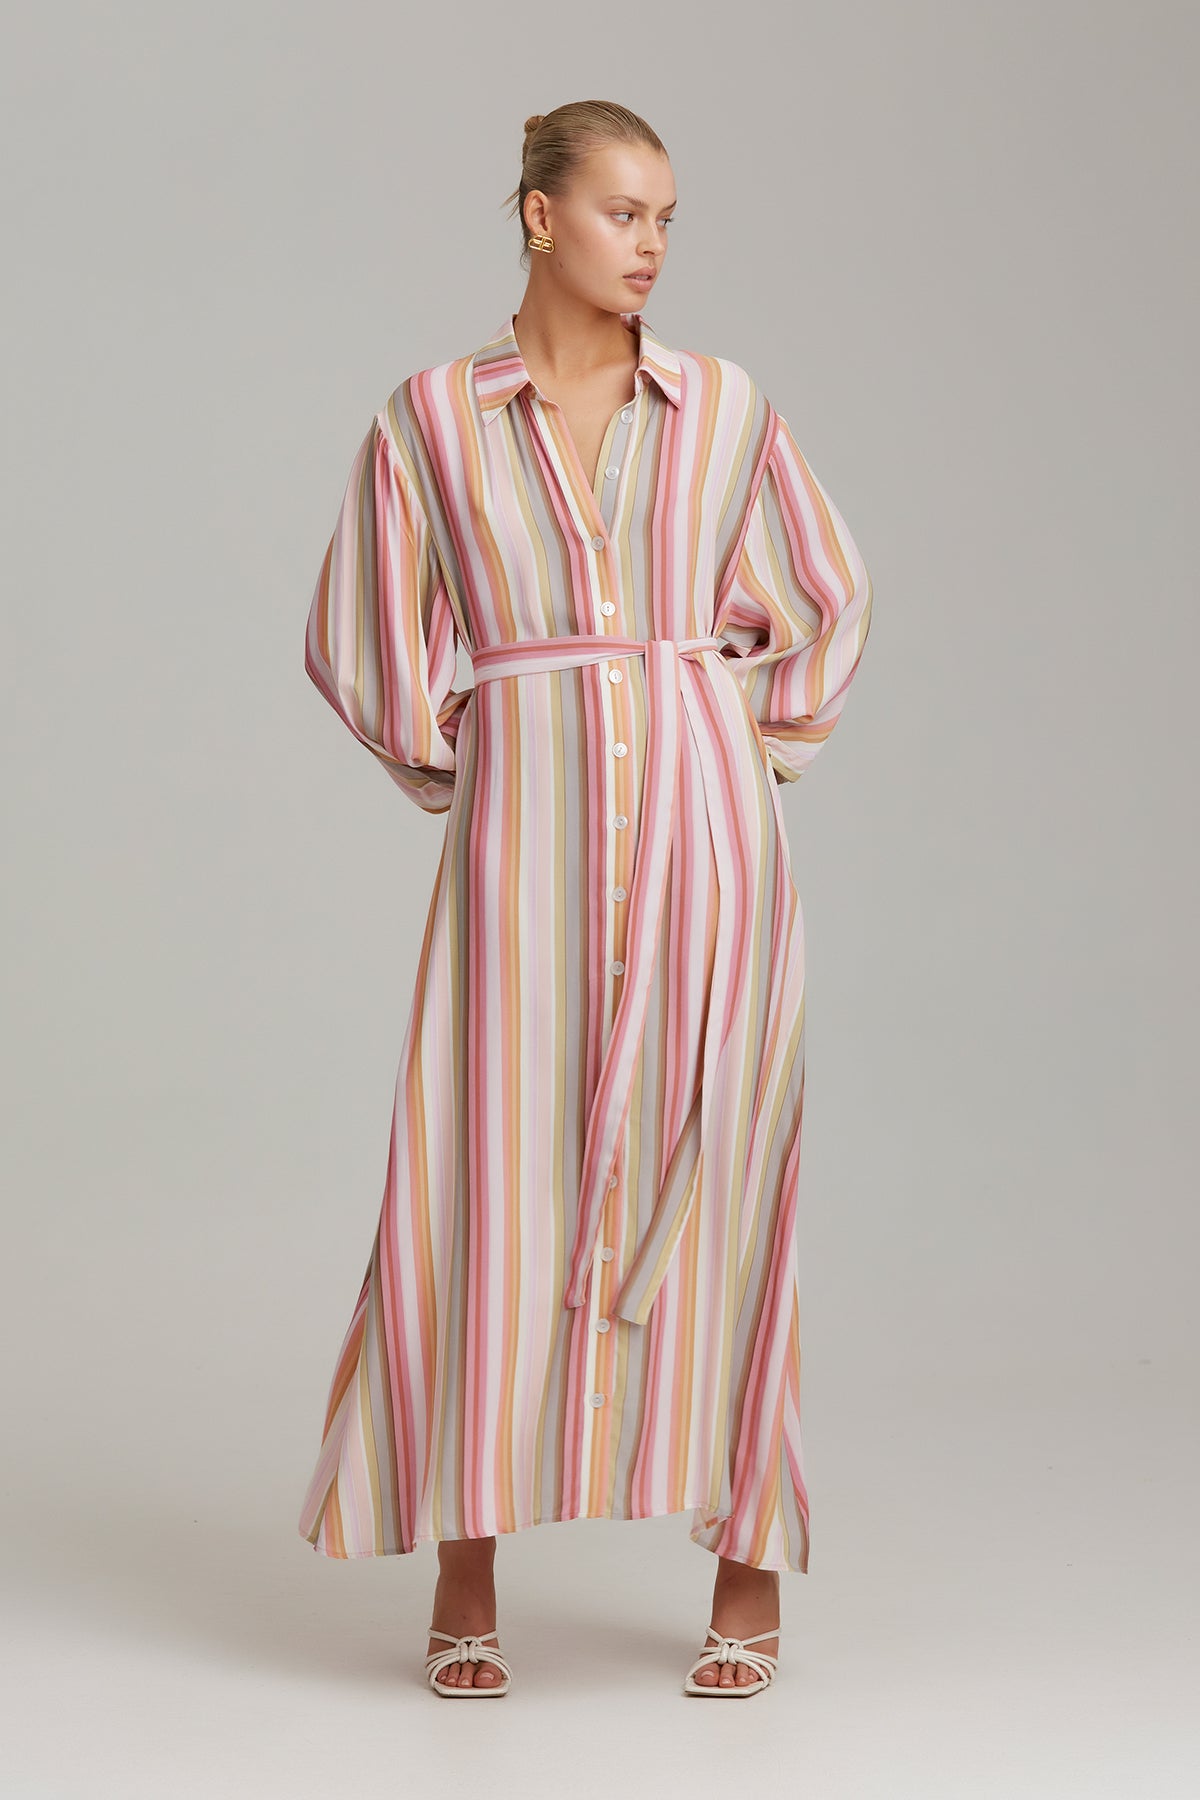 C/MEO Collective - Sincerely Wonderful You Maxi Dress - Soft Stripe